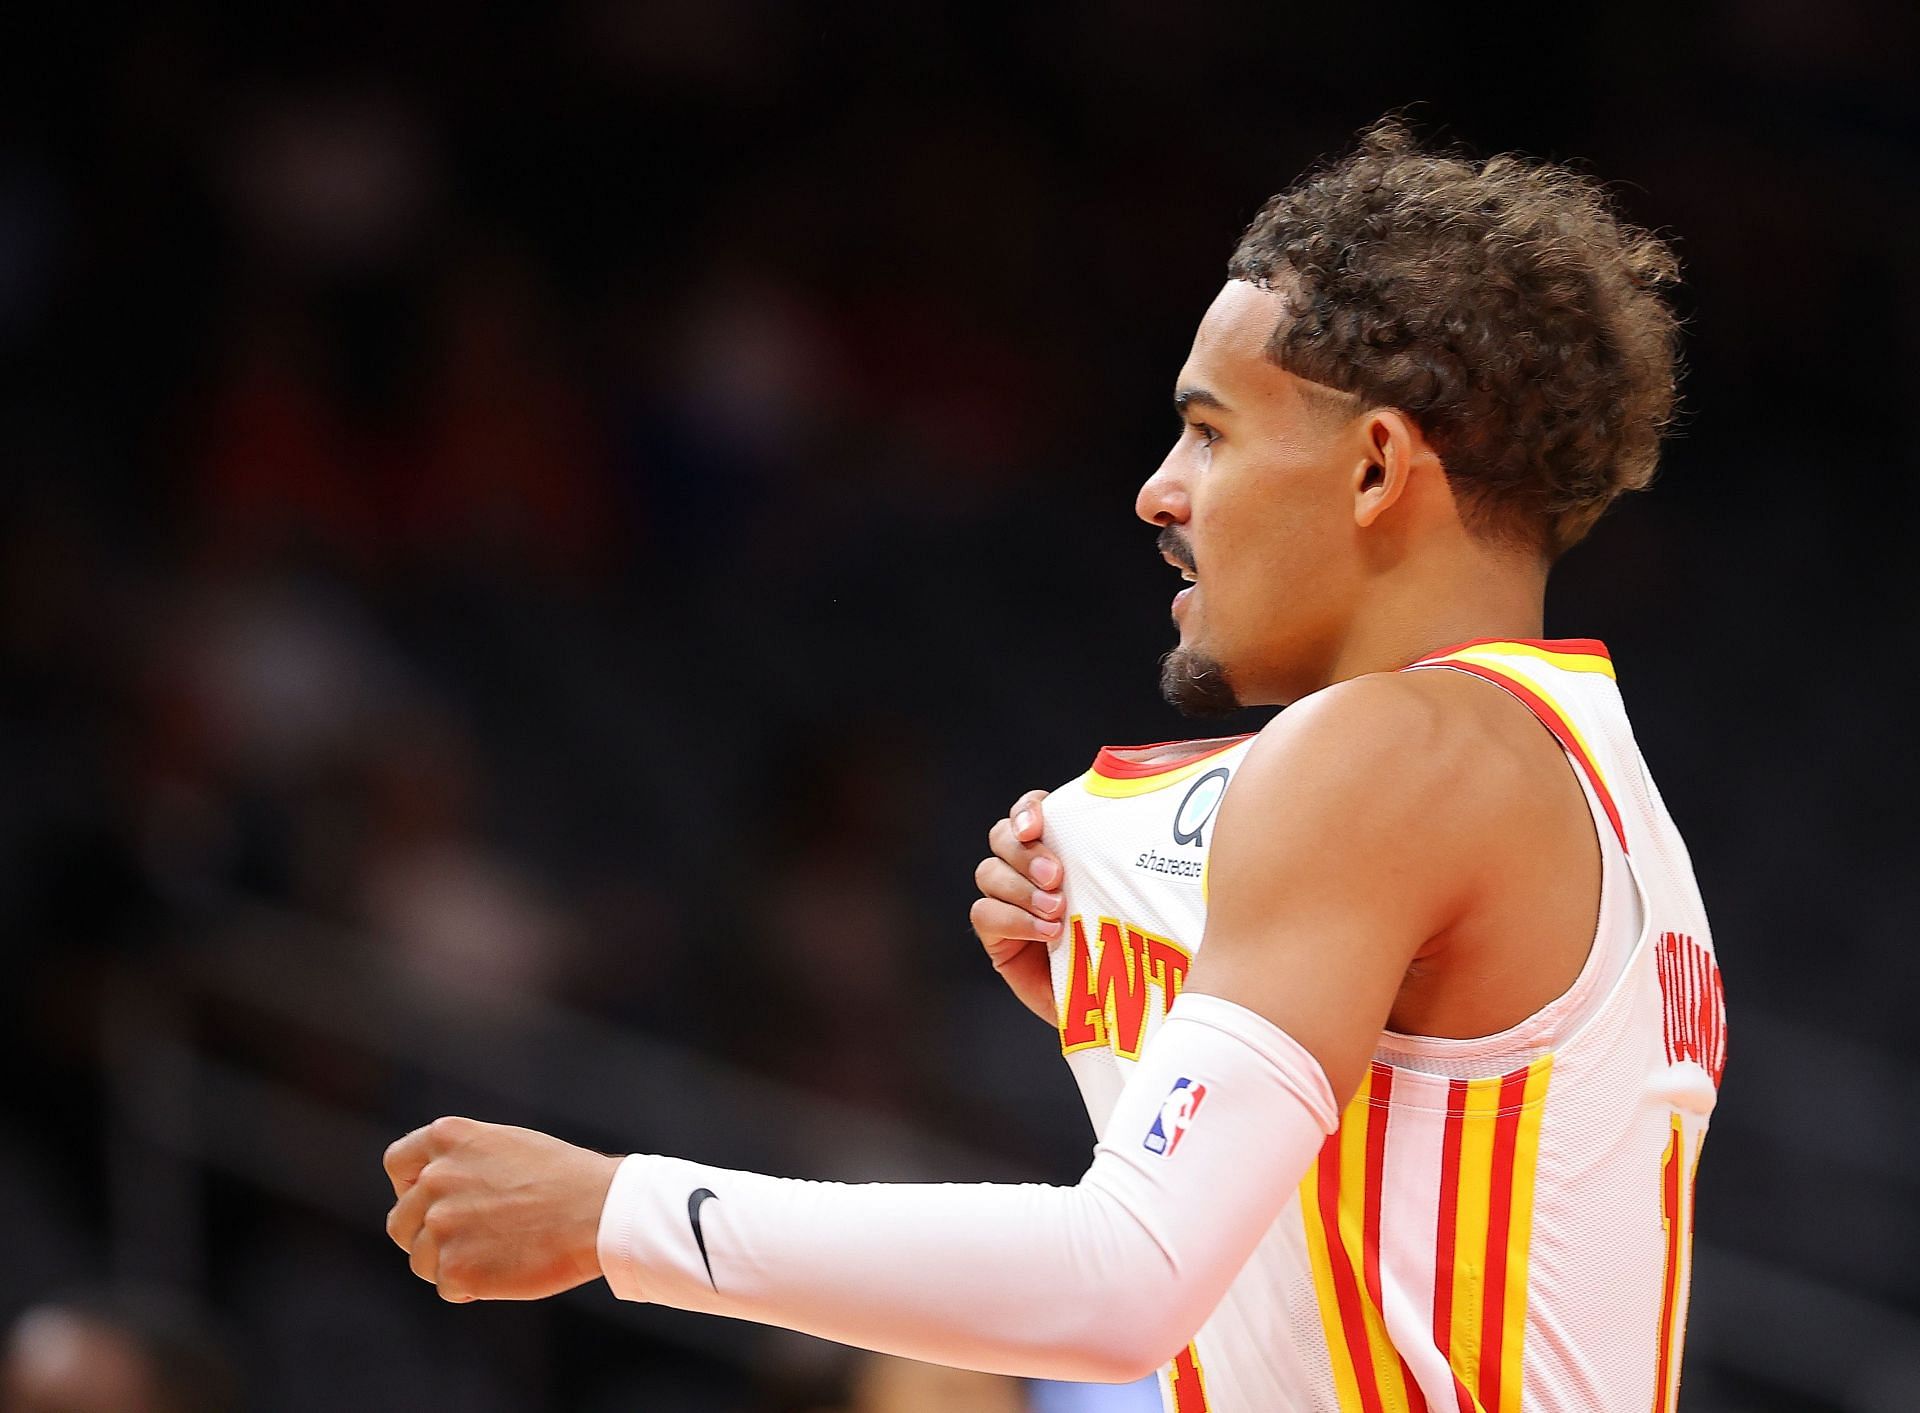 With a year of postseason play in their resume, Trae Young and the Atlanta Hawks hope to represent the East in the NBA Finals.